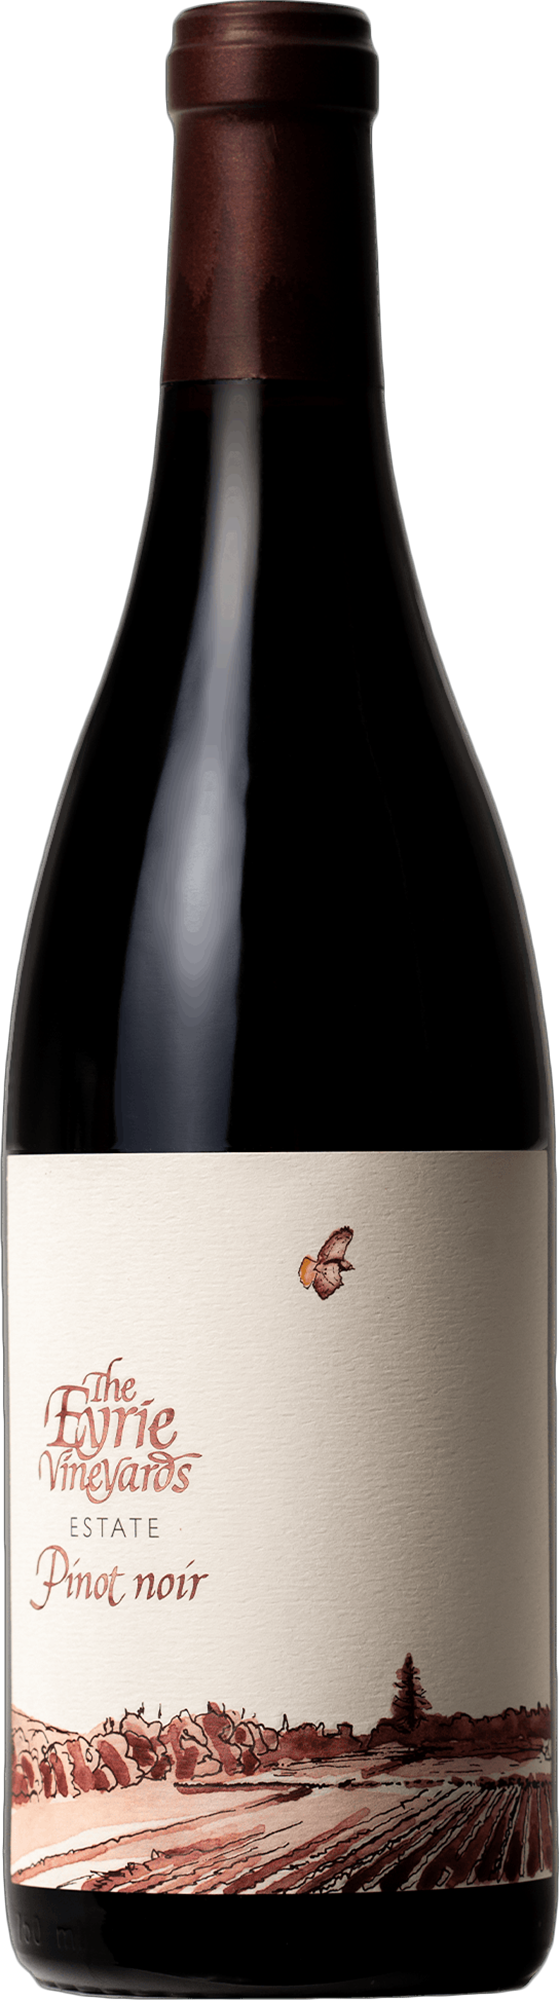 The Eyrie Vineyards Pinot Noir 2021